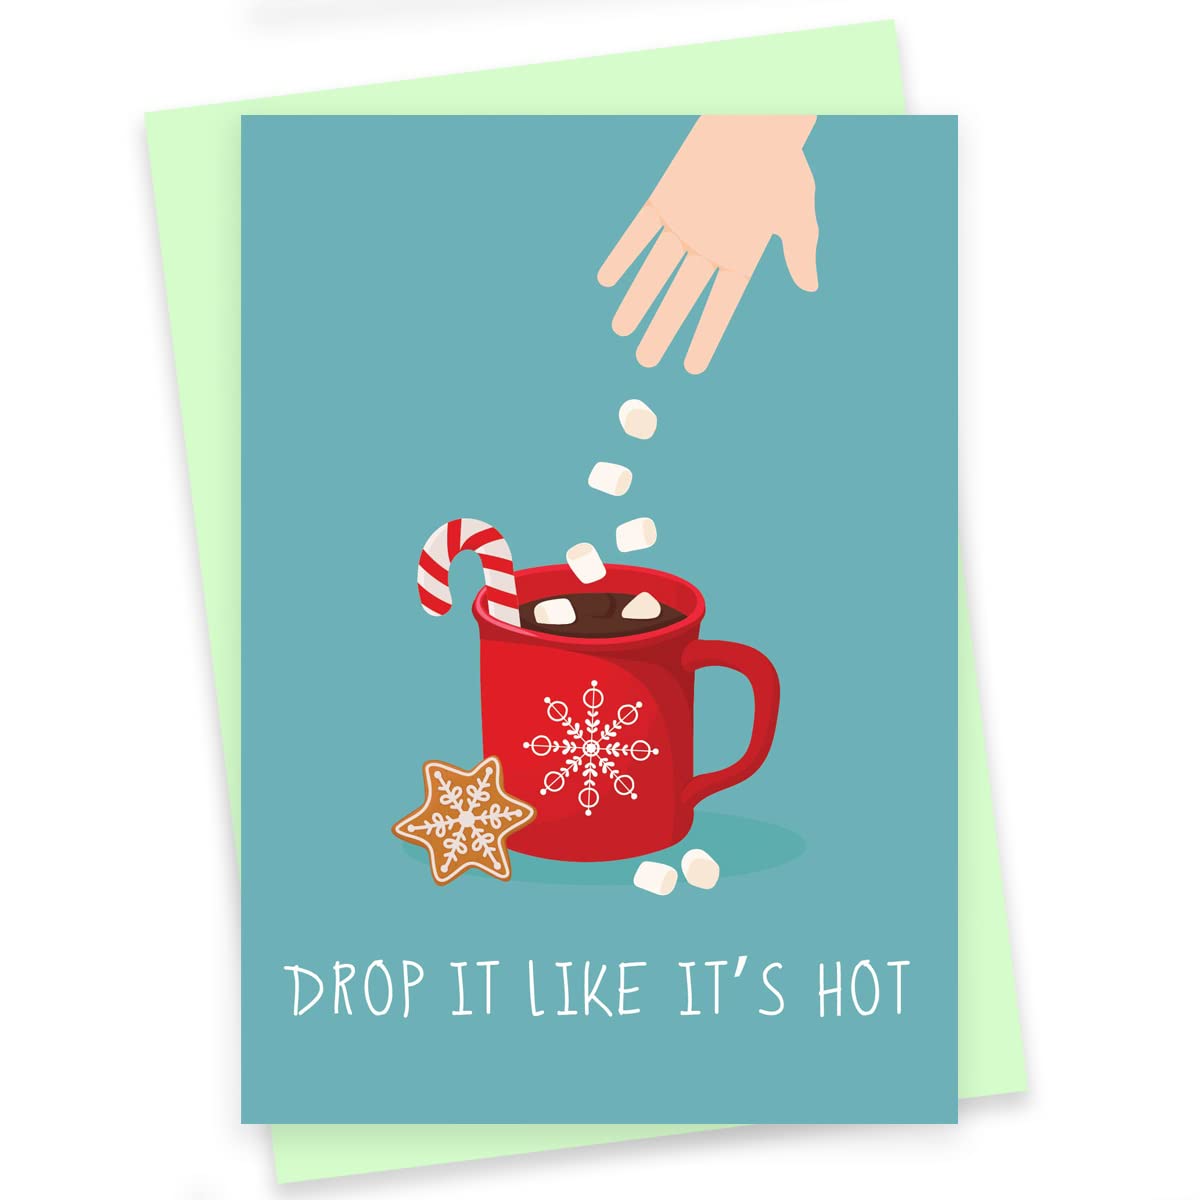 Rack Jack Funny Christmas Xmas Greeting Card for Secret Santa Gifts New Year Friends Family Colleagues with Pastel Envelope - Drop It Like It's Hot